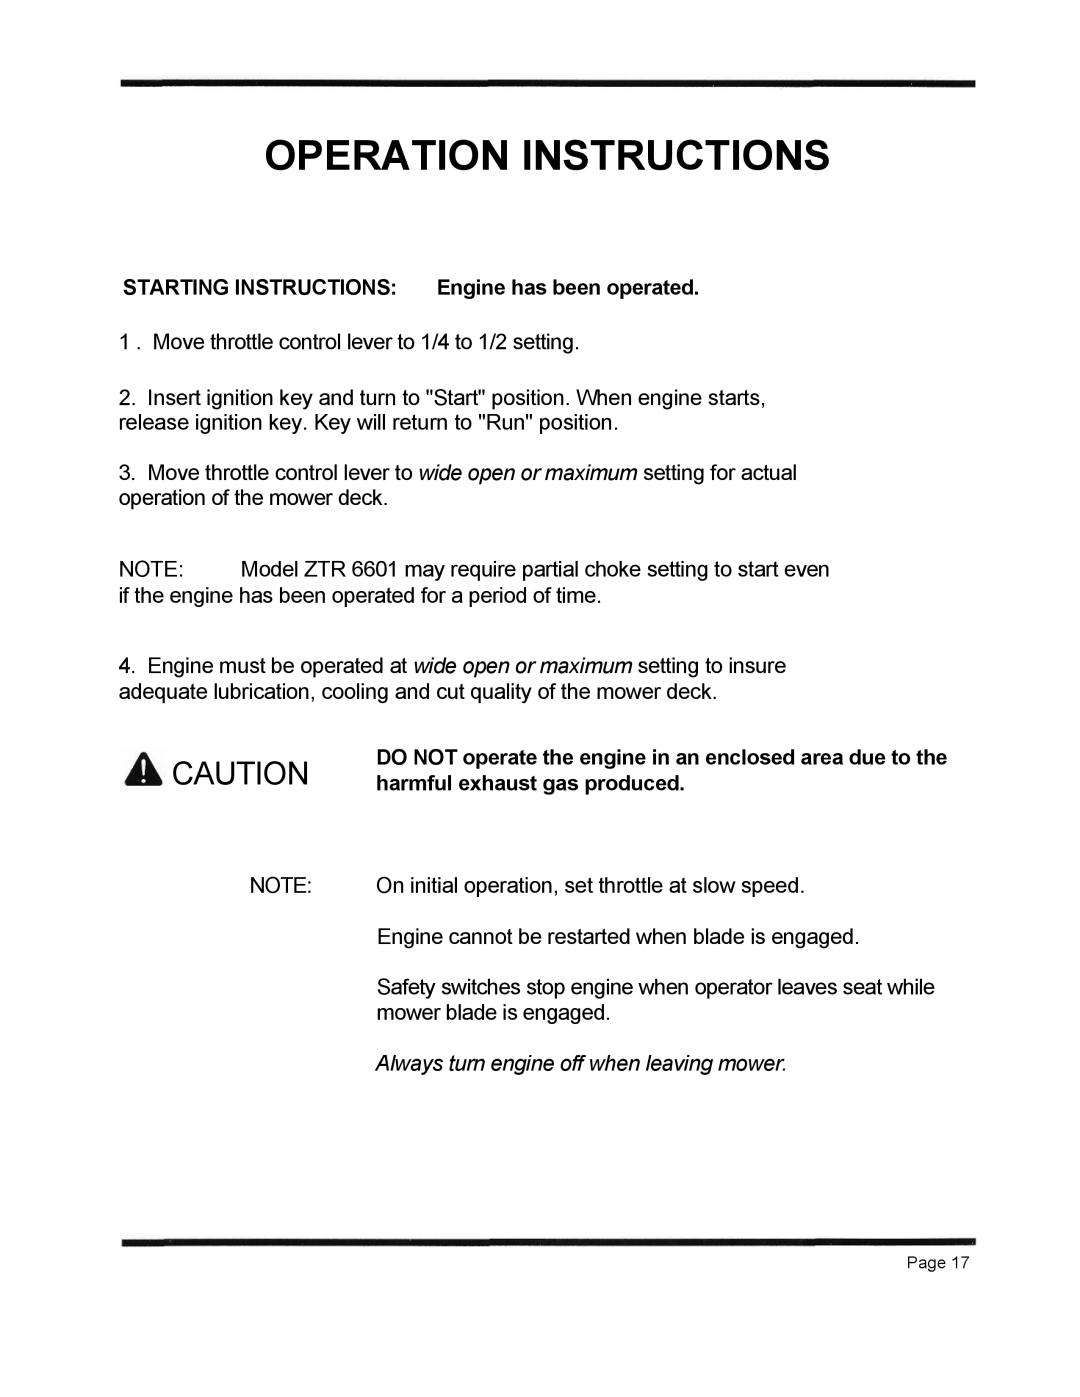 Dixon 6601 Series manual Operation Instructions, Always turn engine off when leaving mower 